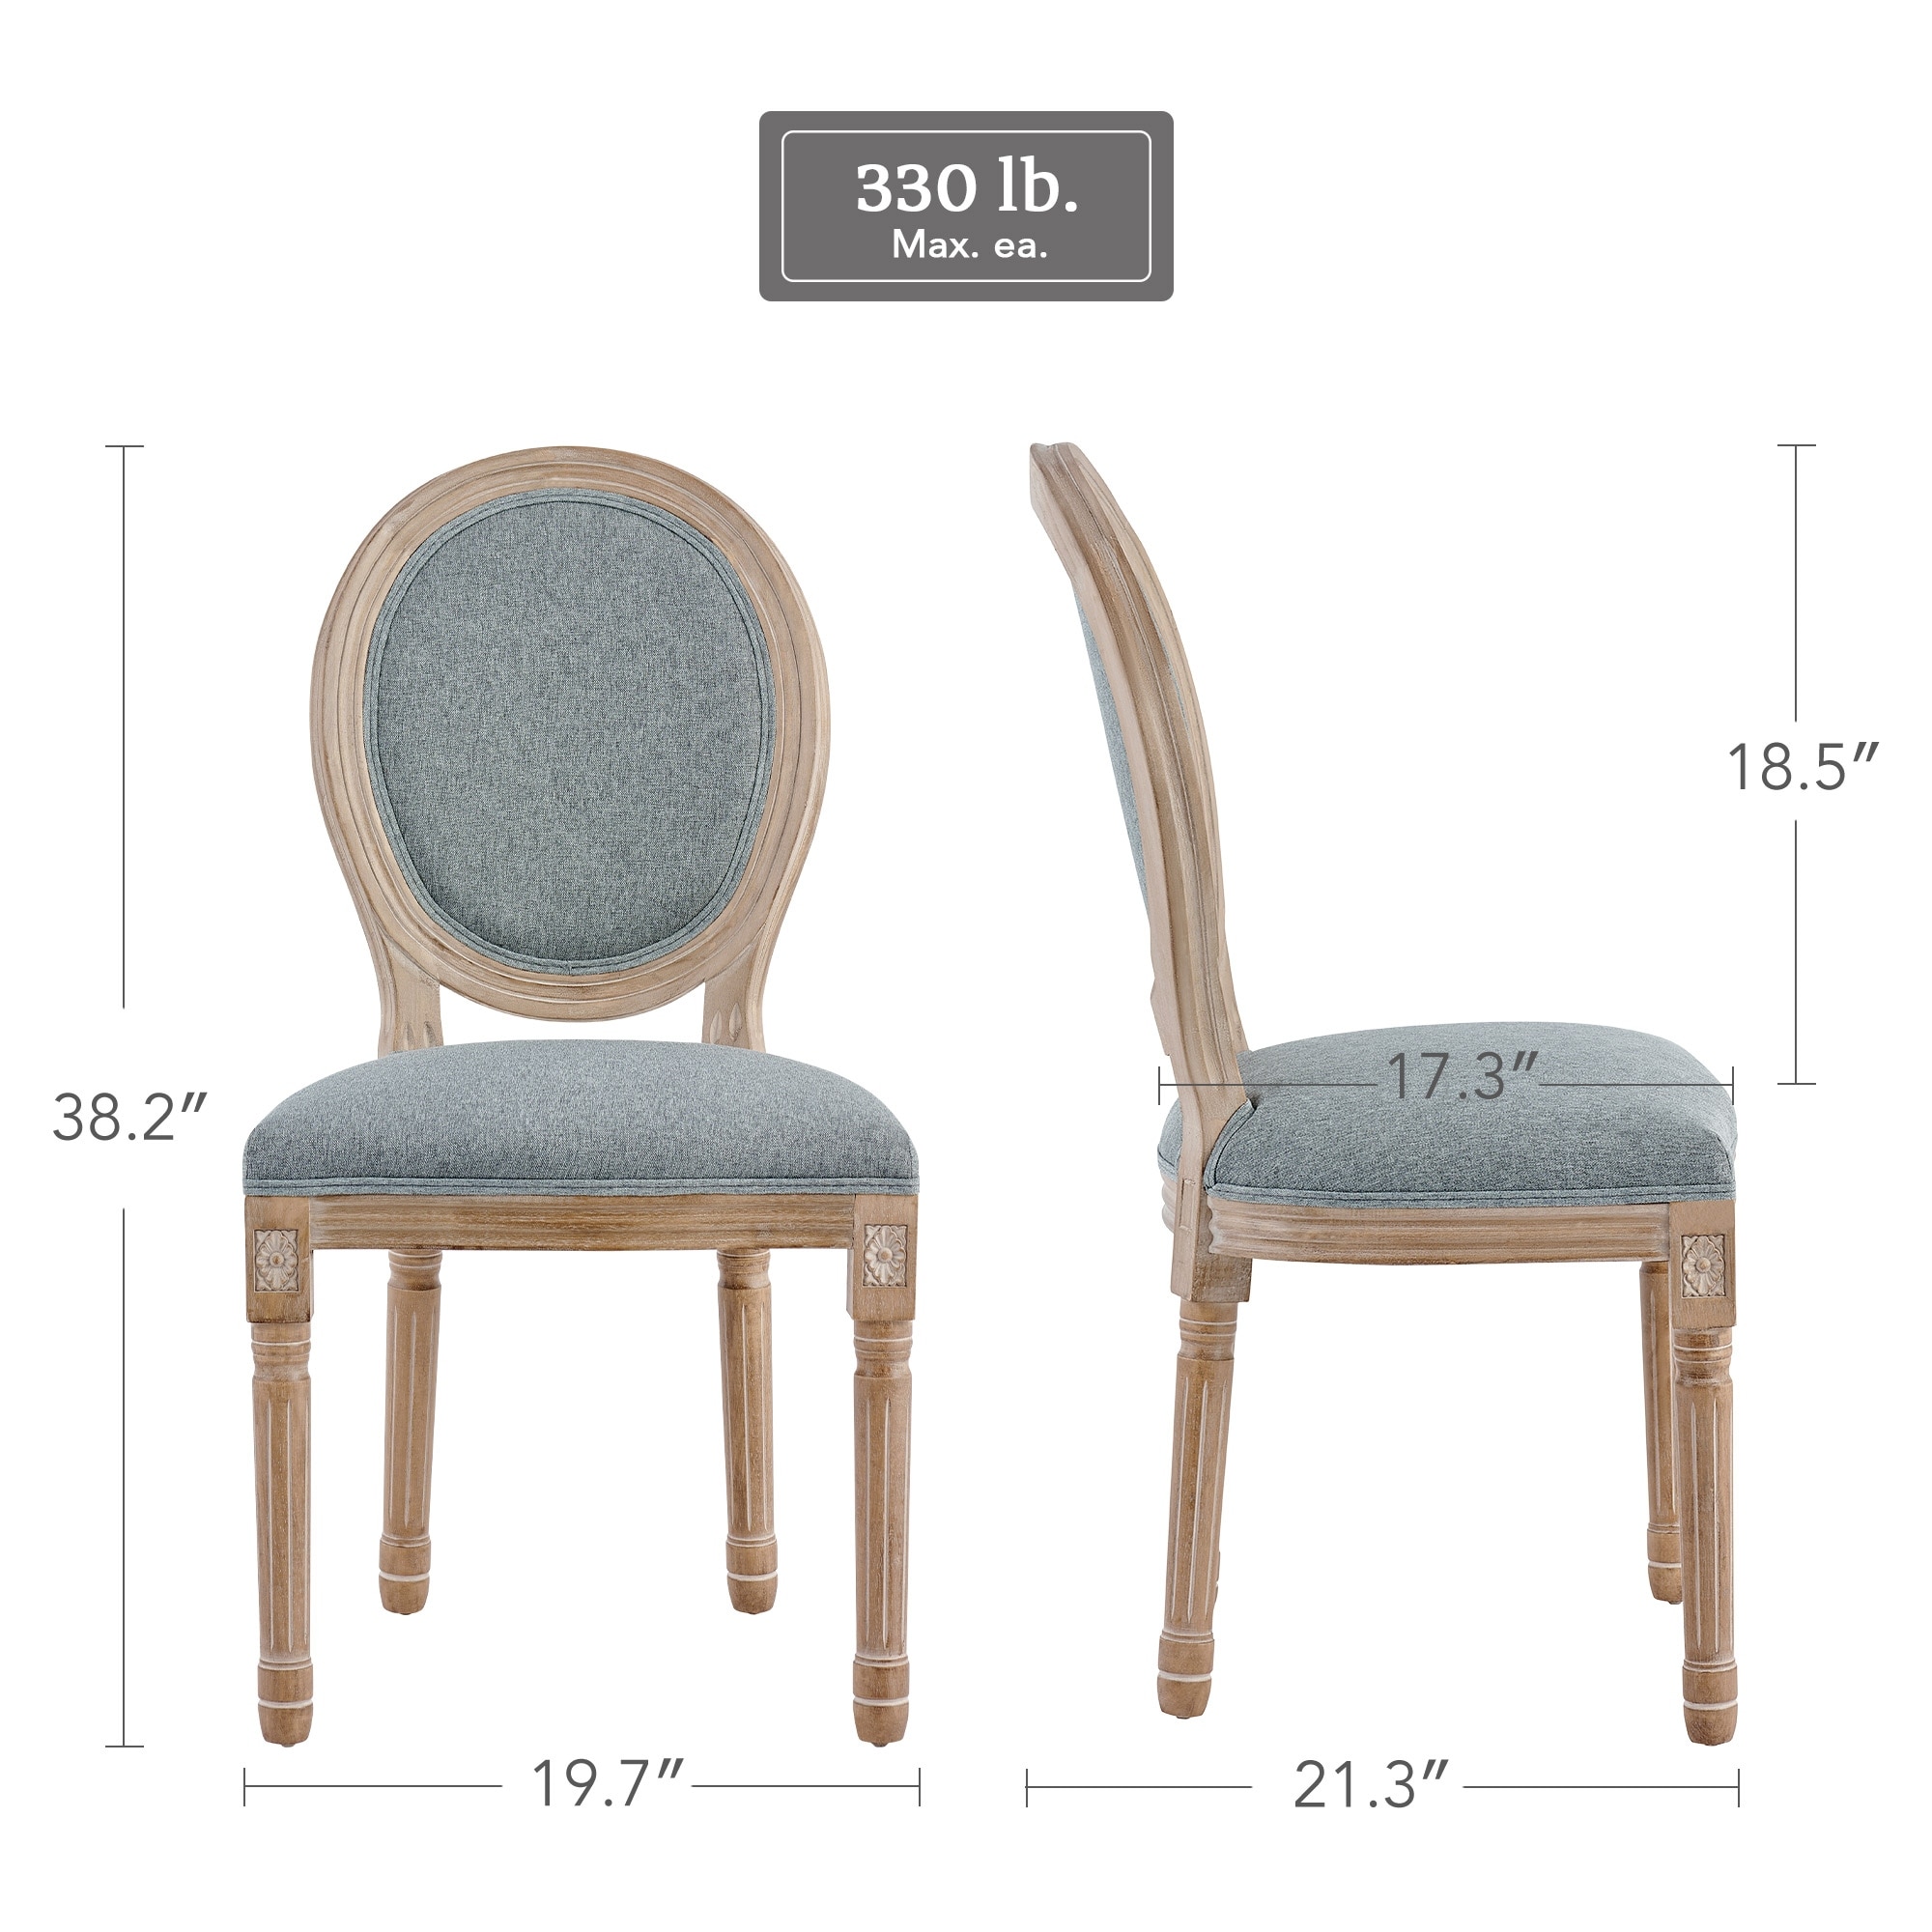 CO-Z King Louis XVI Upholstered Dining and Side Chairs, Set of 2